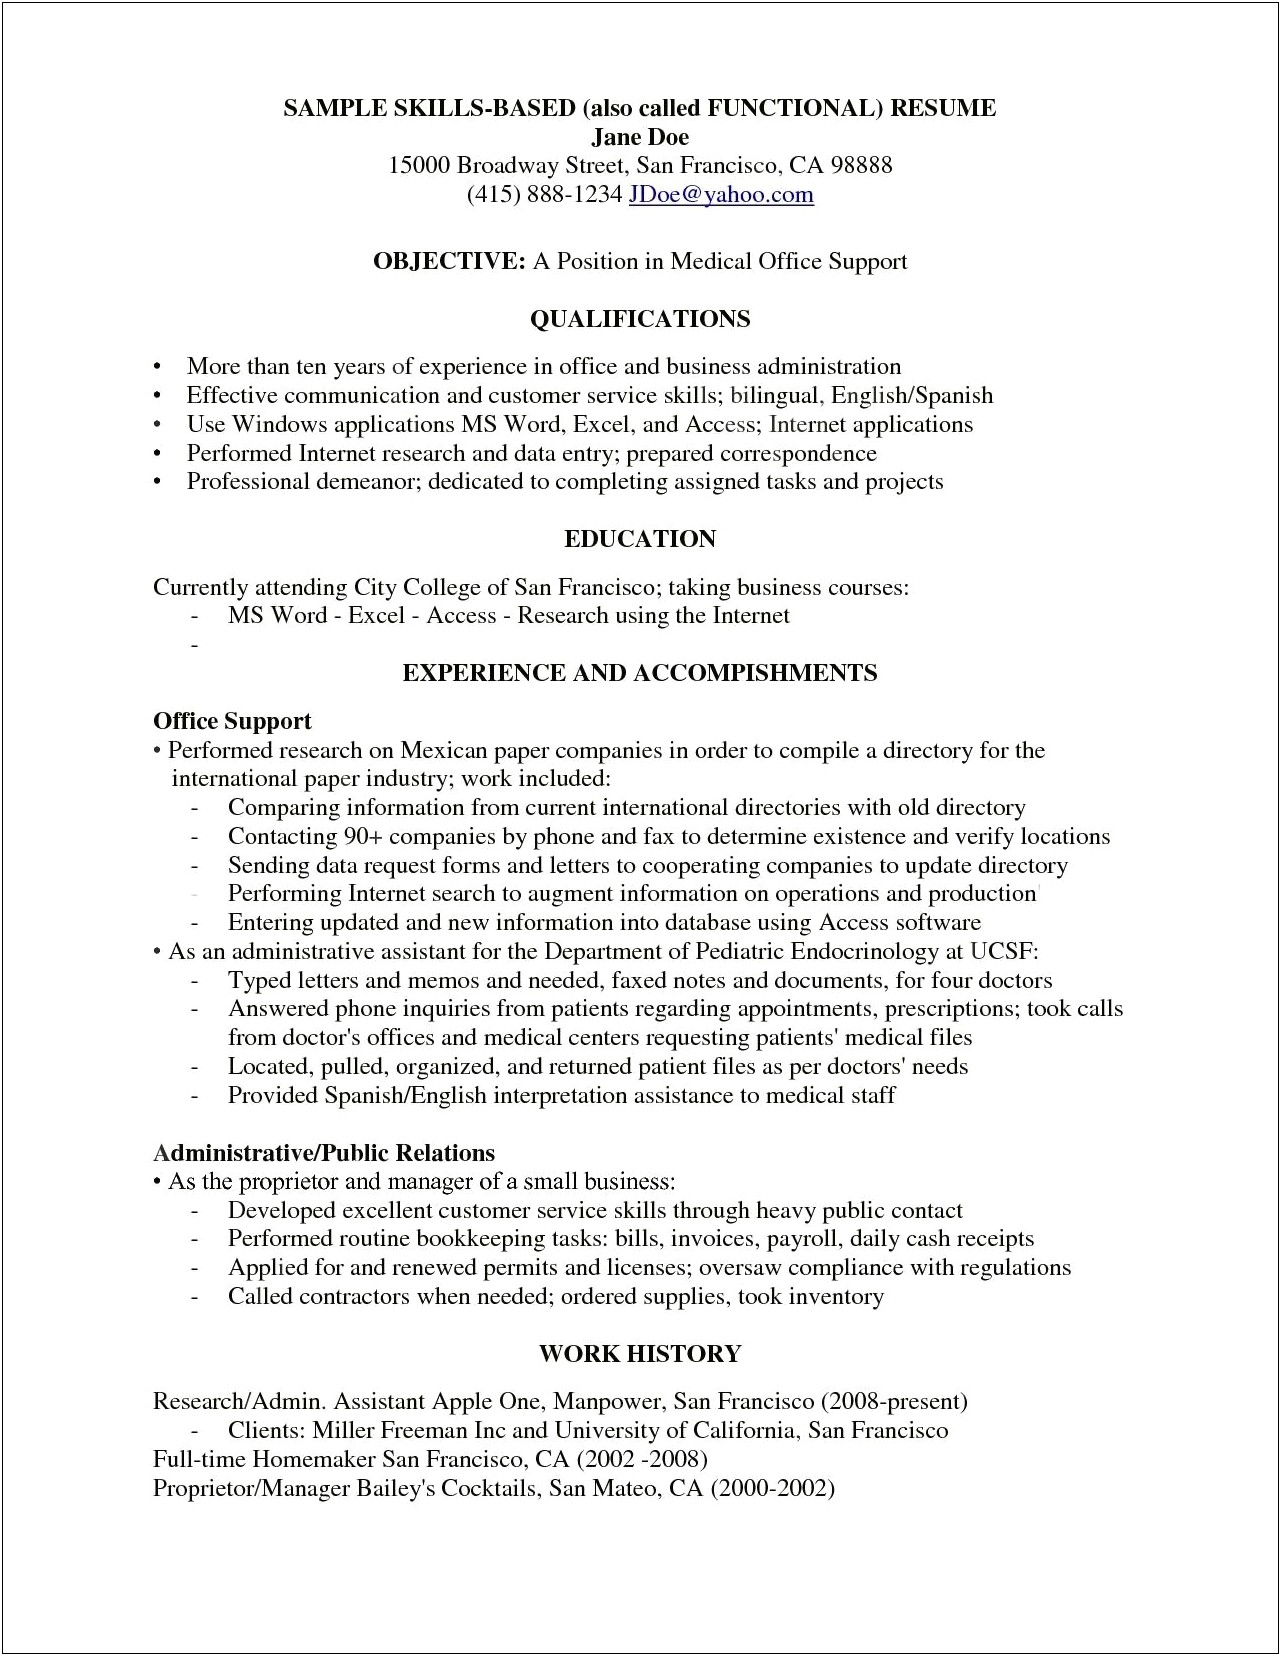 Research Resume Objective To Gain More Research Experience